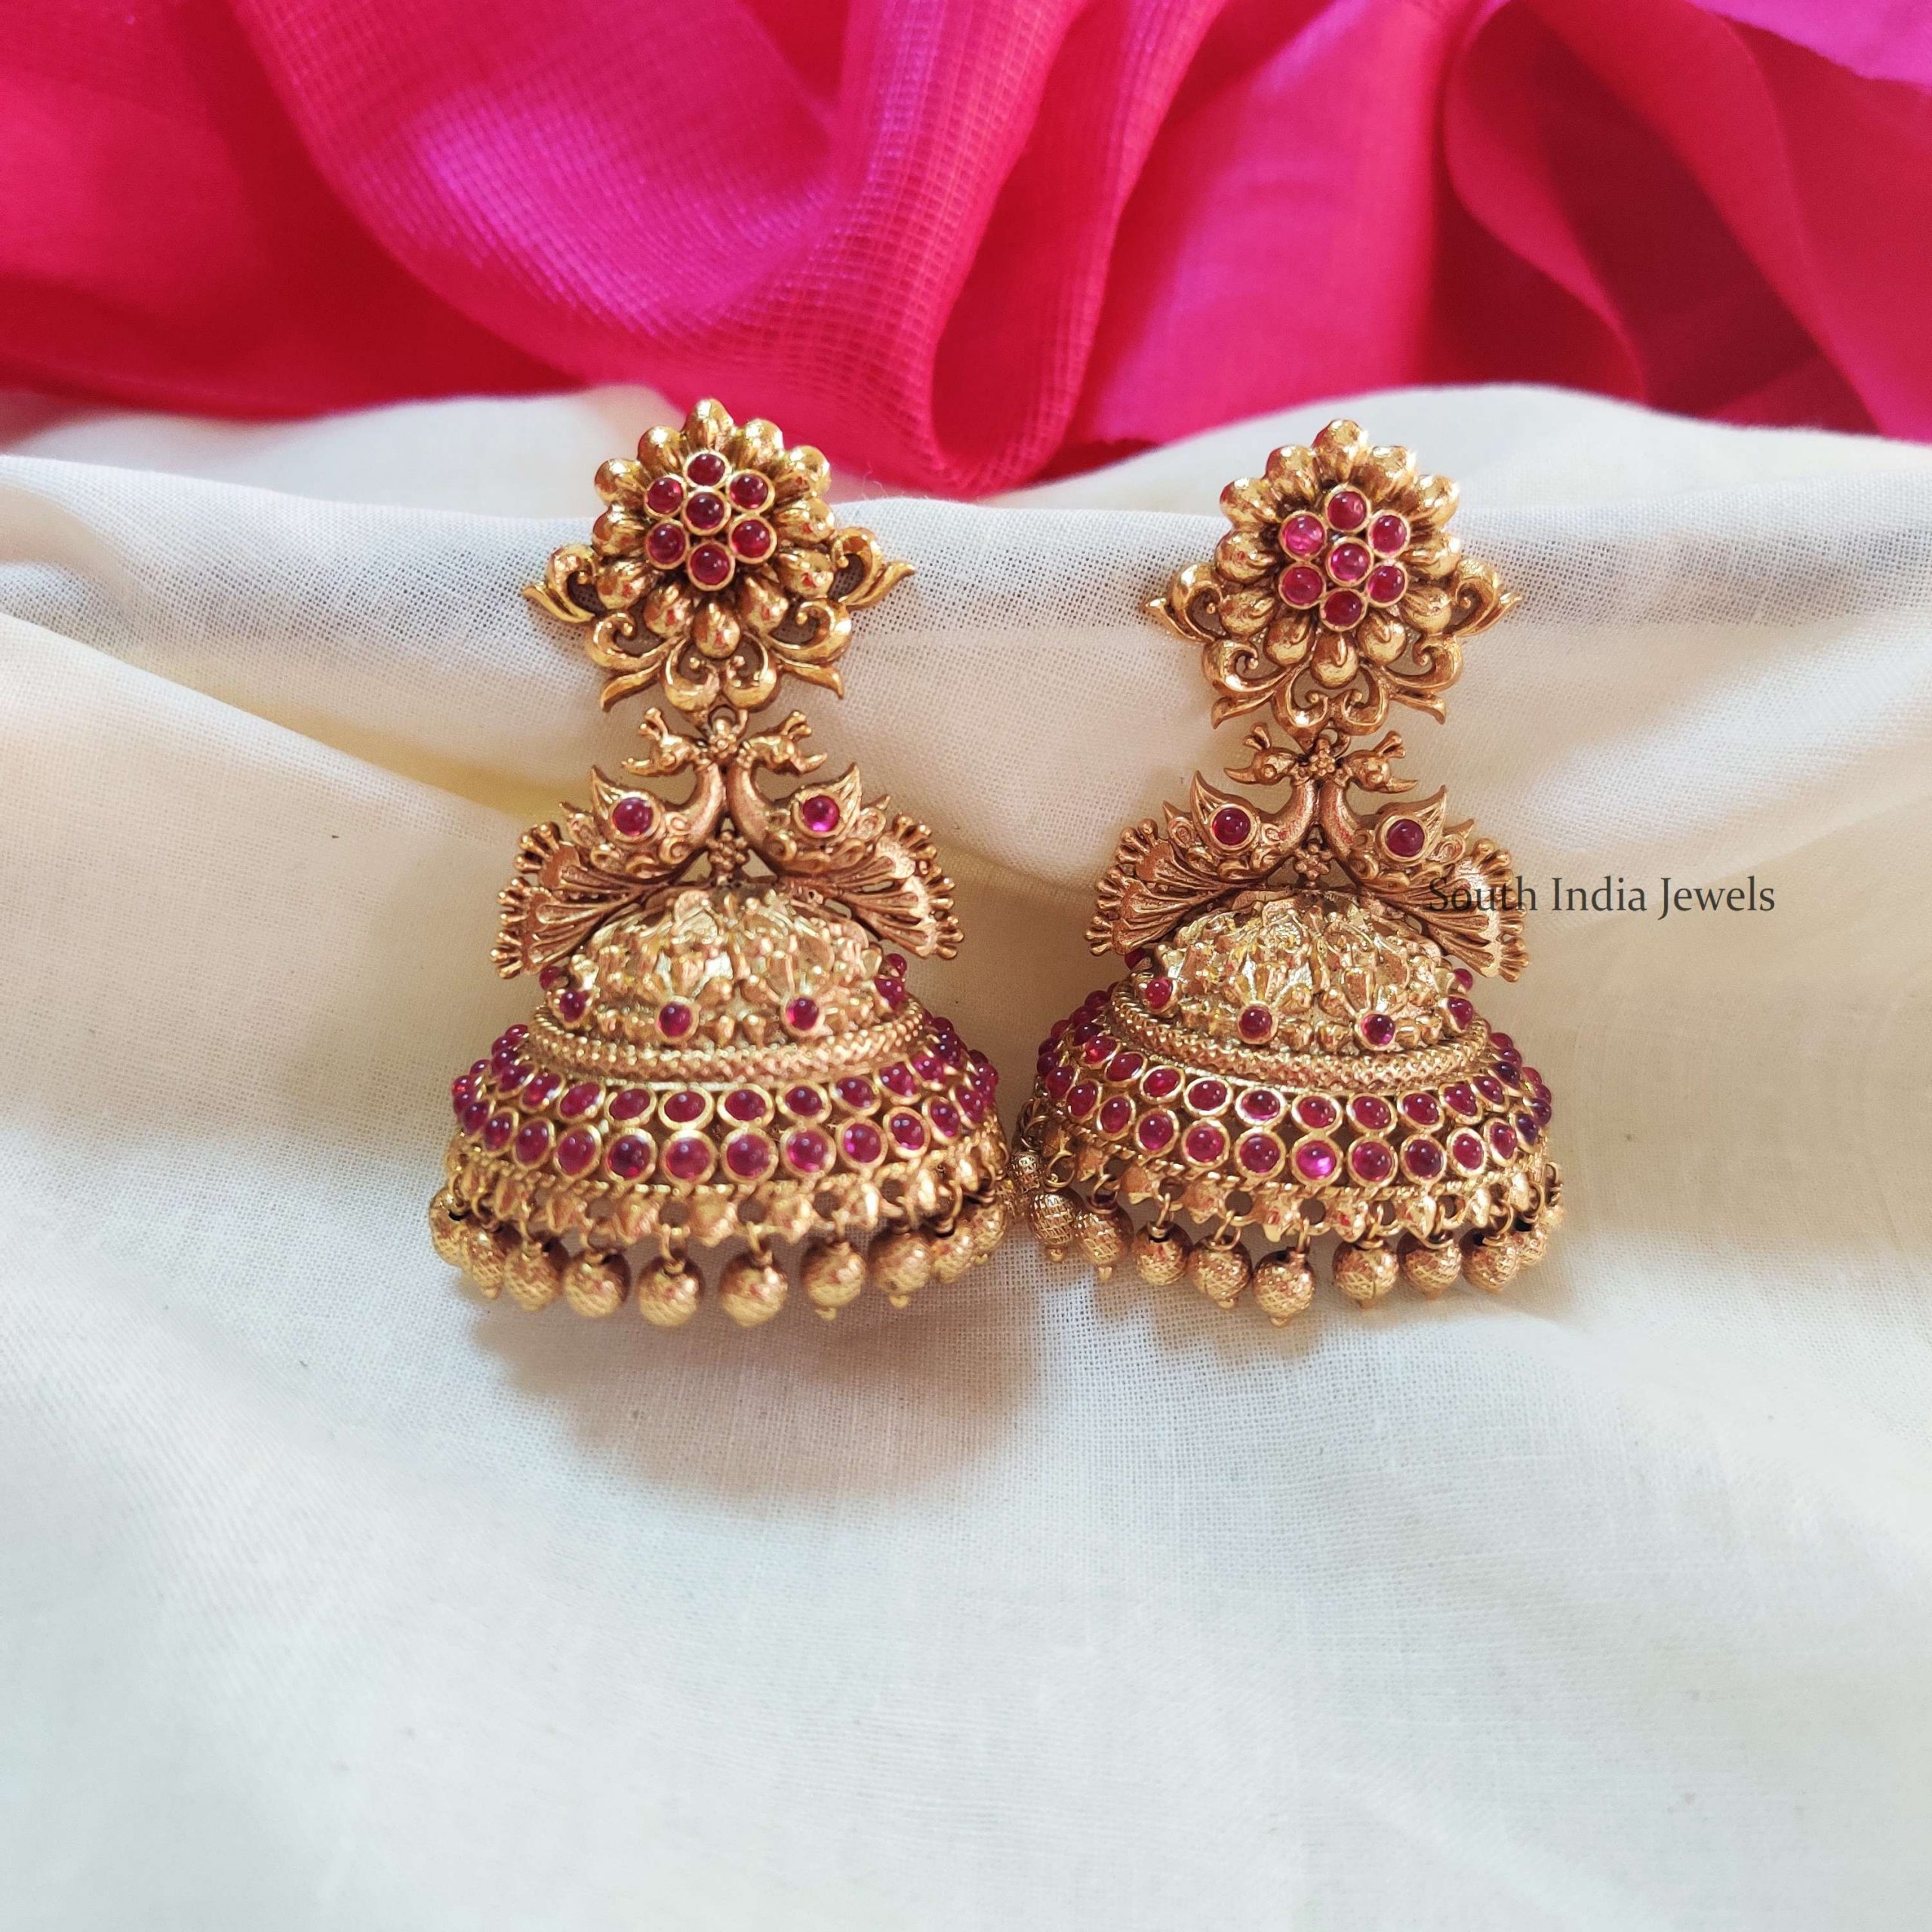 Pretty Floral Peacock Jhumkas - South India Jewels